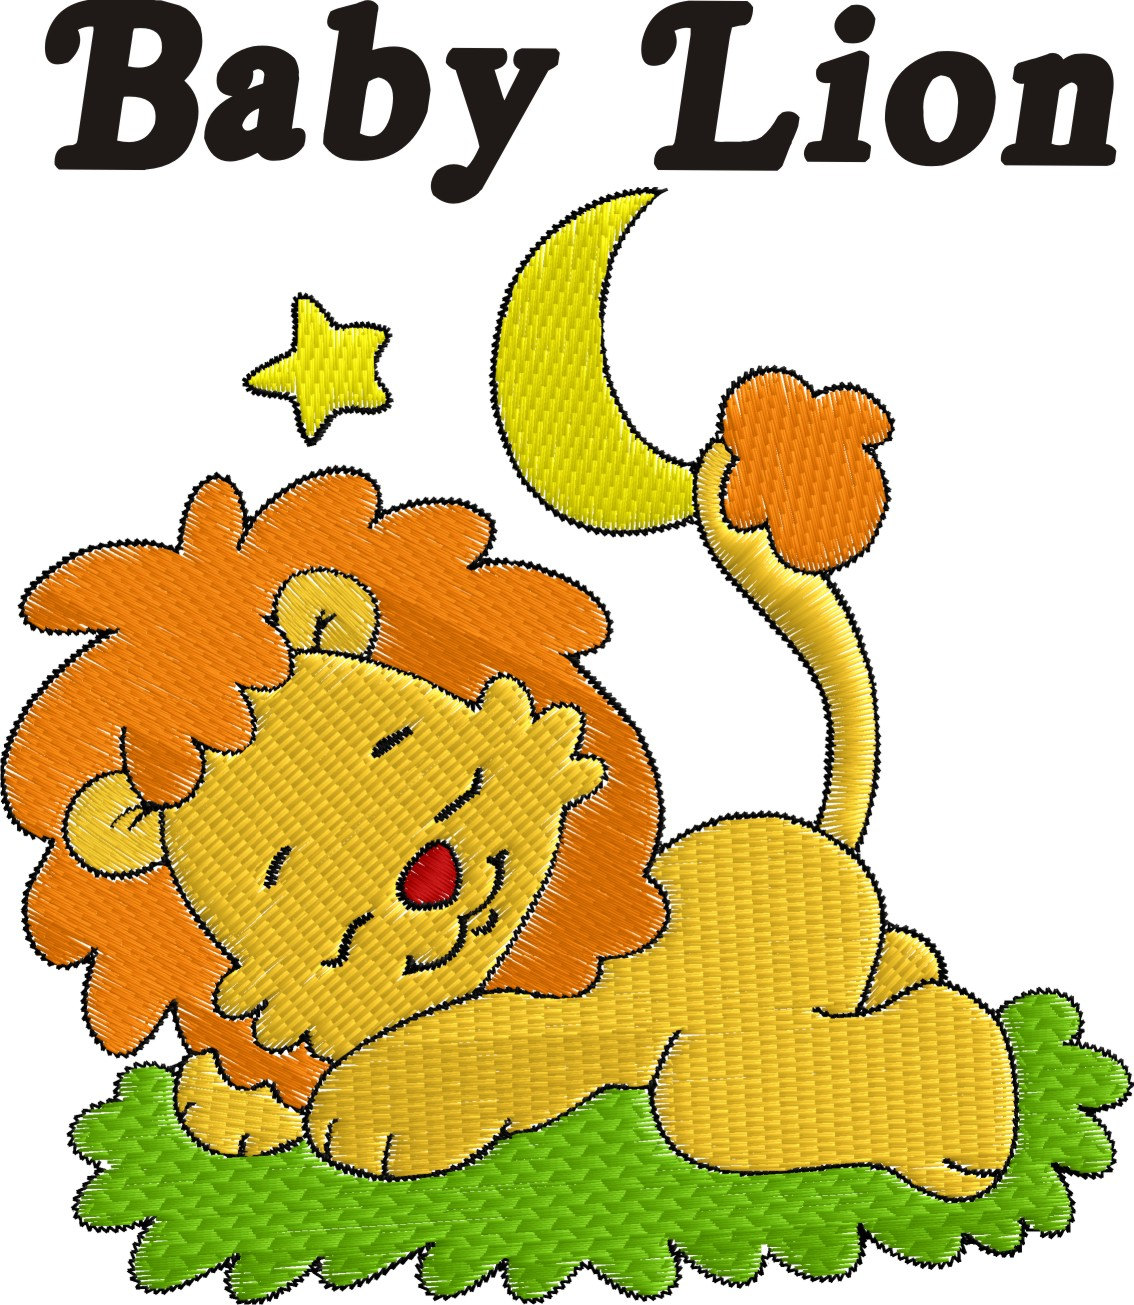 Baby lion clipart 6